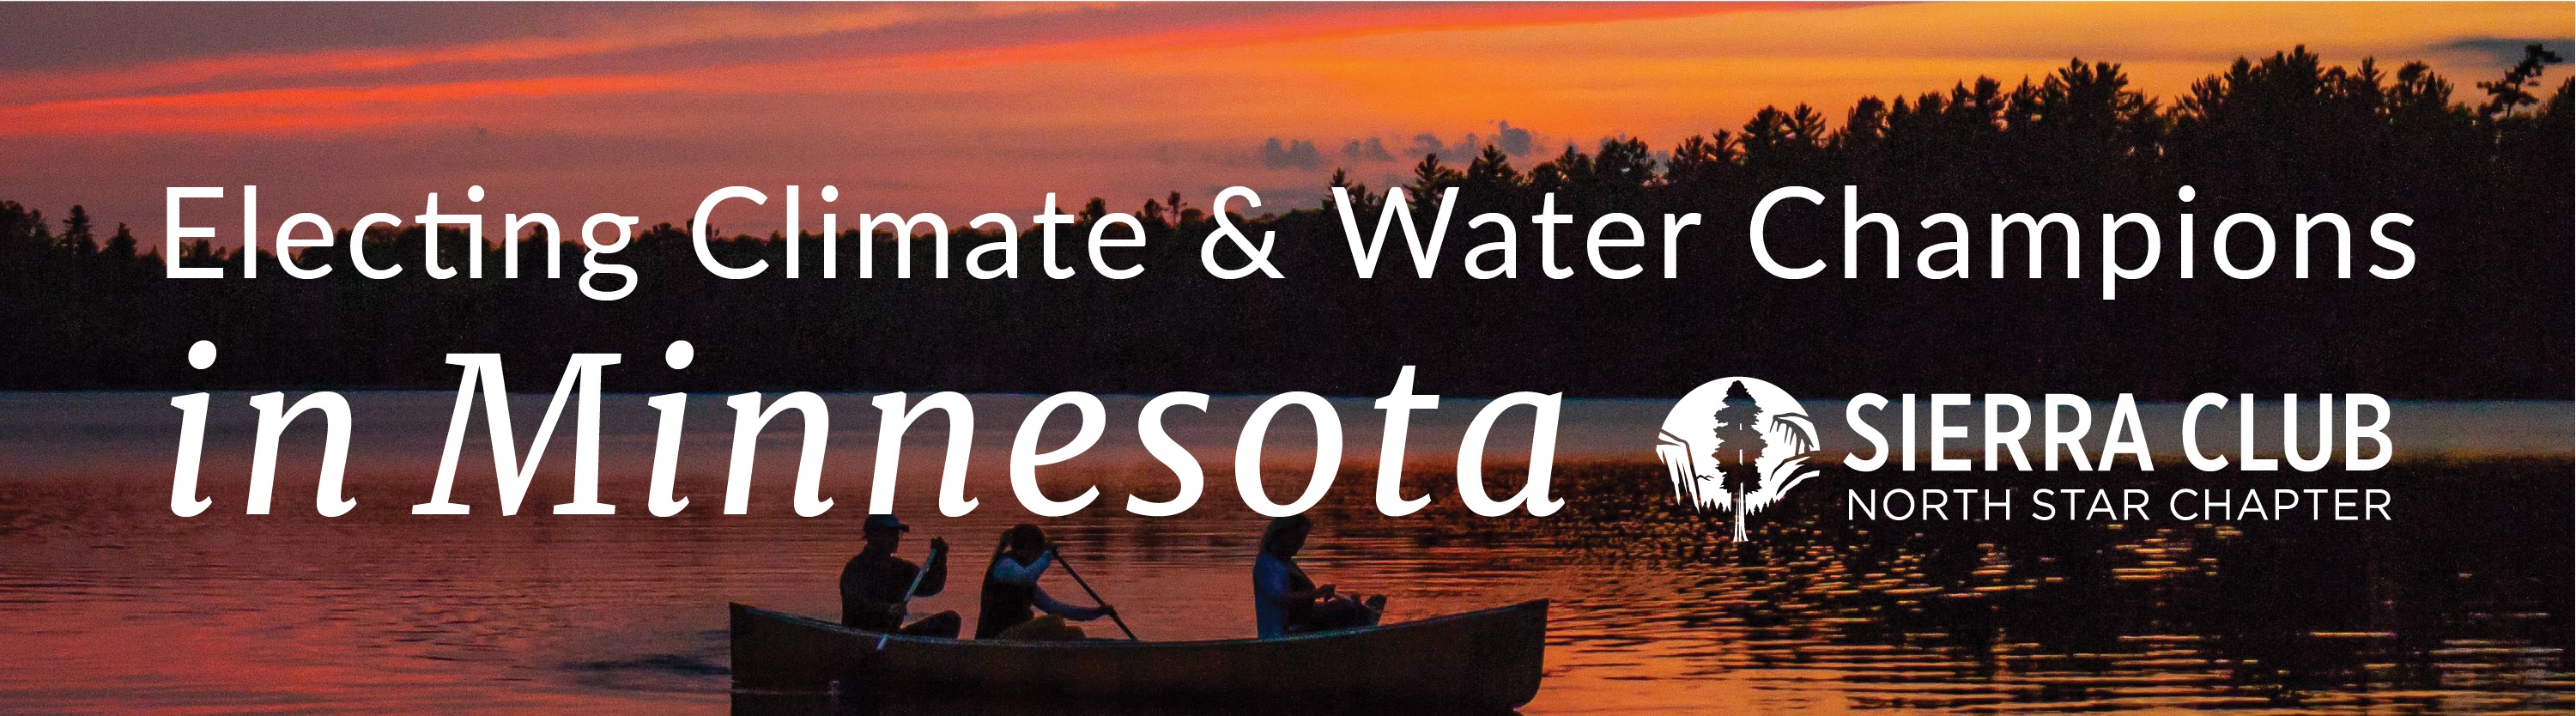 the text "Electing Climate & Water Champions in Minnesota" over a photo of canoeists on a lake at sunset